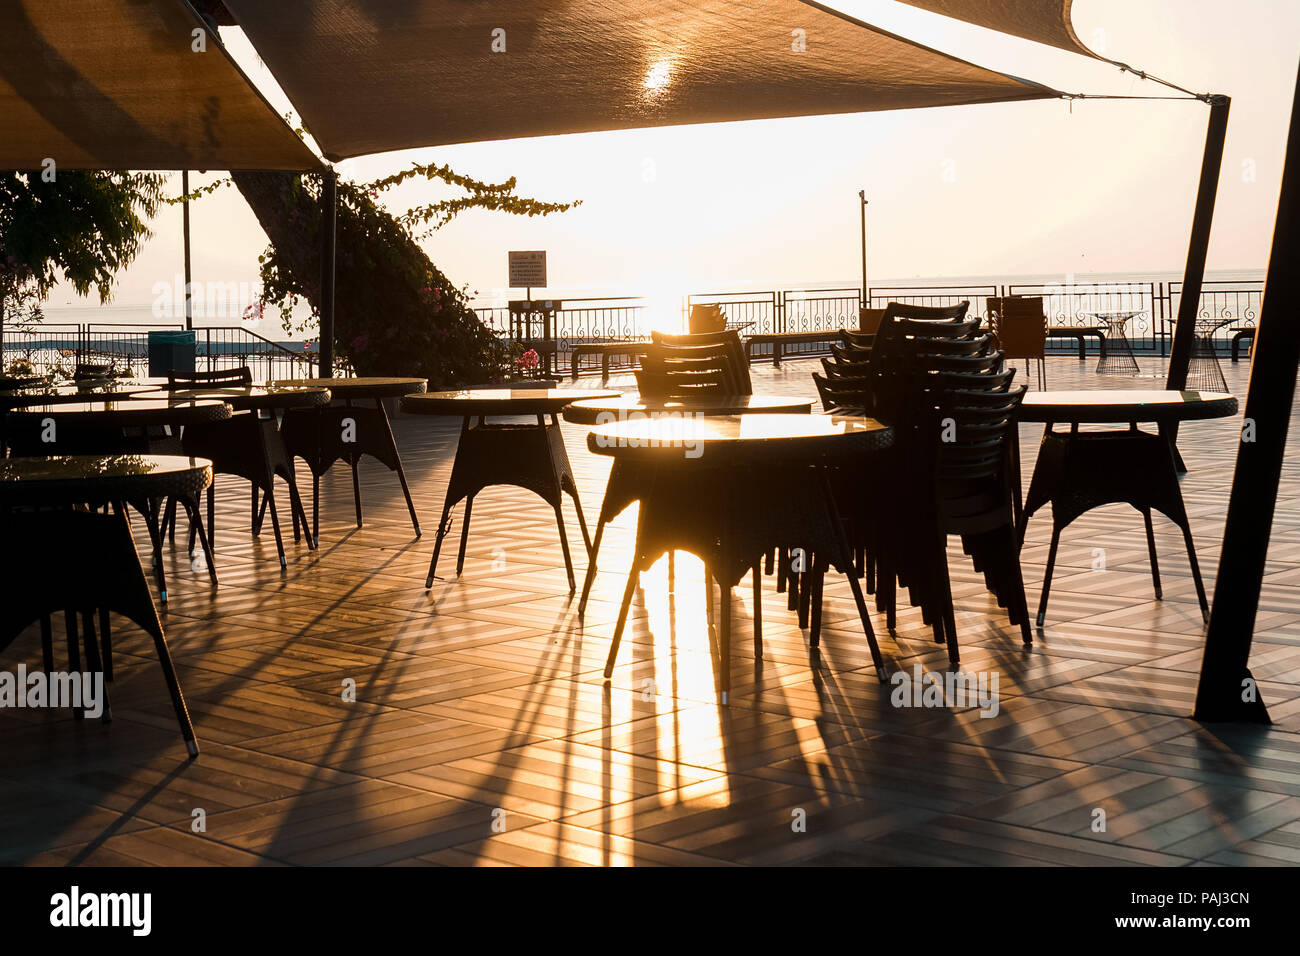 Restaurant by the sea under sunset. Cafe on the seashore. Sea under sunset. Stock Photo